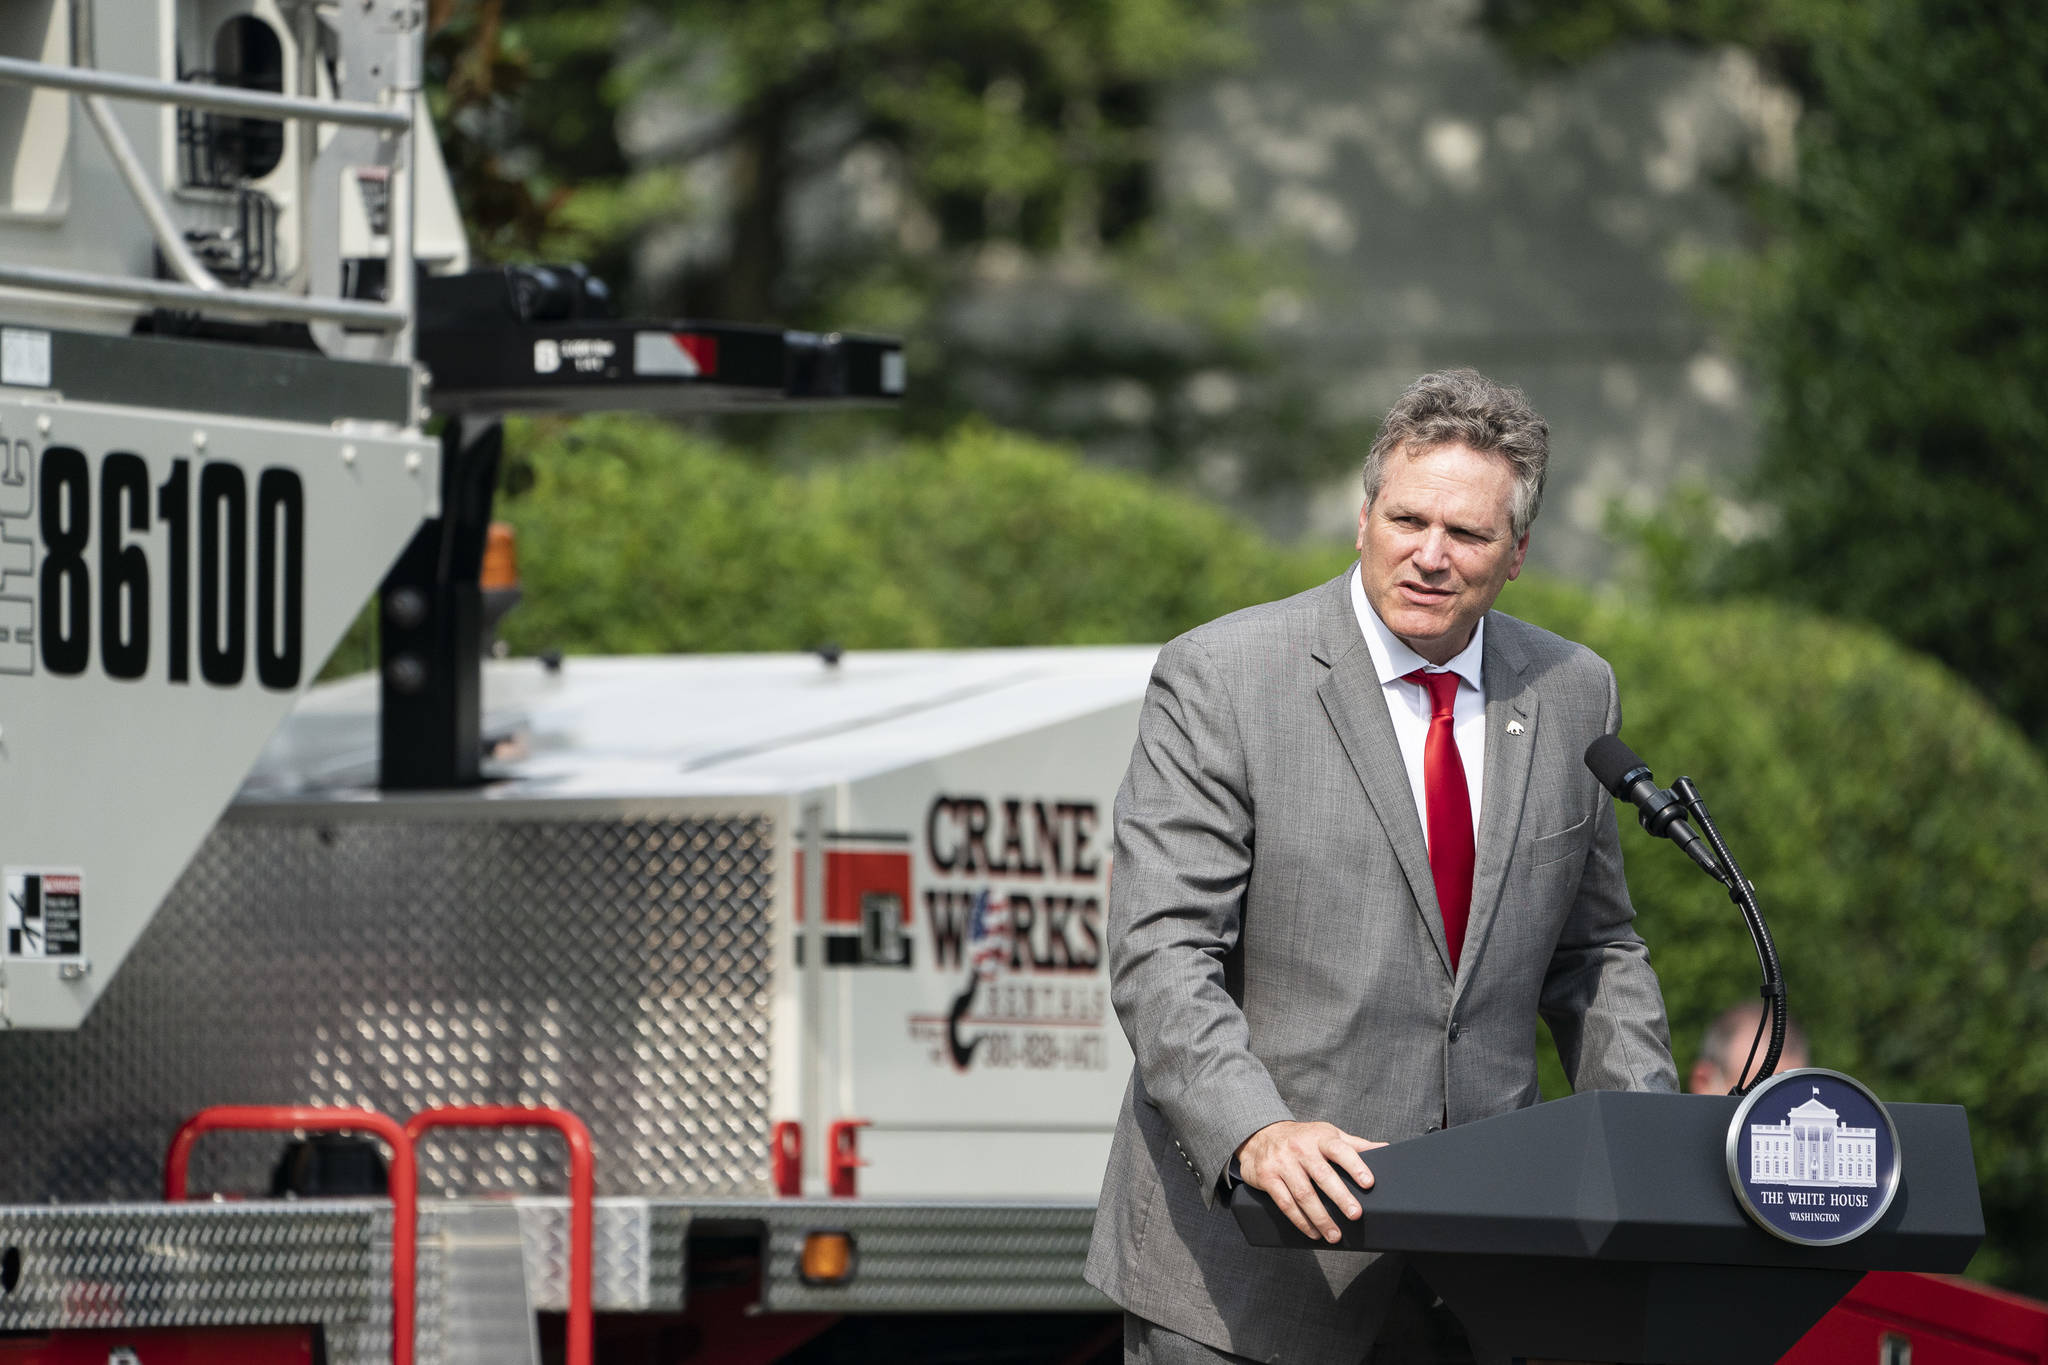 President Donald Trump listens as Alaska Governor Mike Dunleavy delivers remarks at the Rolling Back Regulations to Help All Americans event Thursday, July 16, 2020, on the South Lawn of the White House. (Official White House Photo | Joyce N. Boghosian)